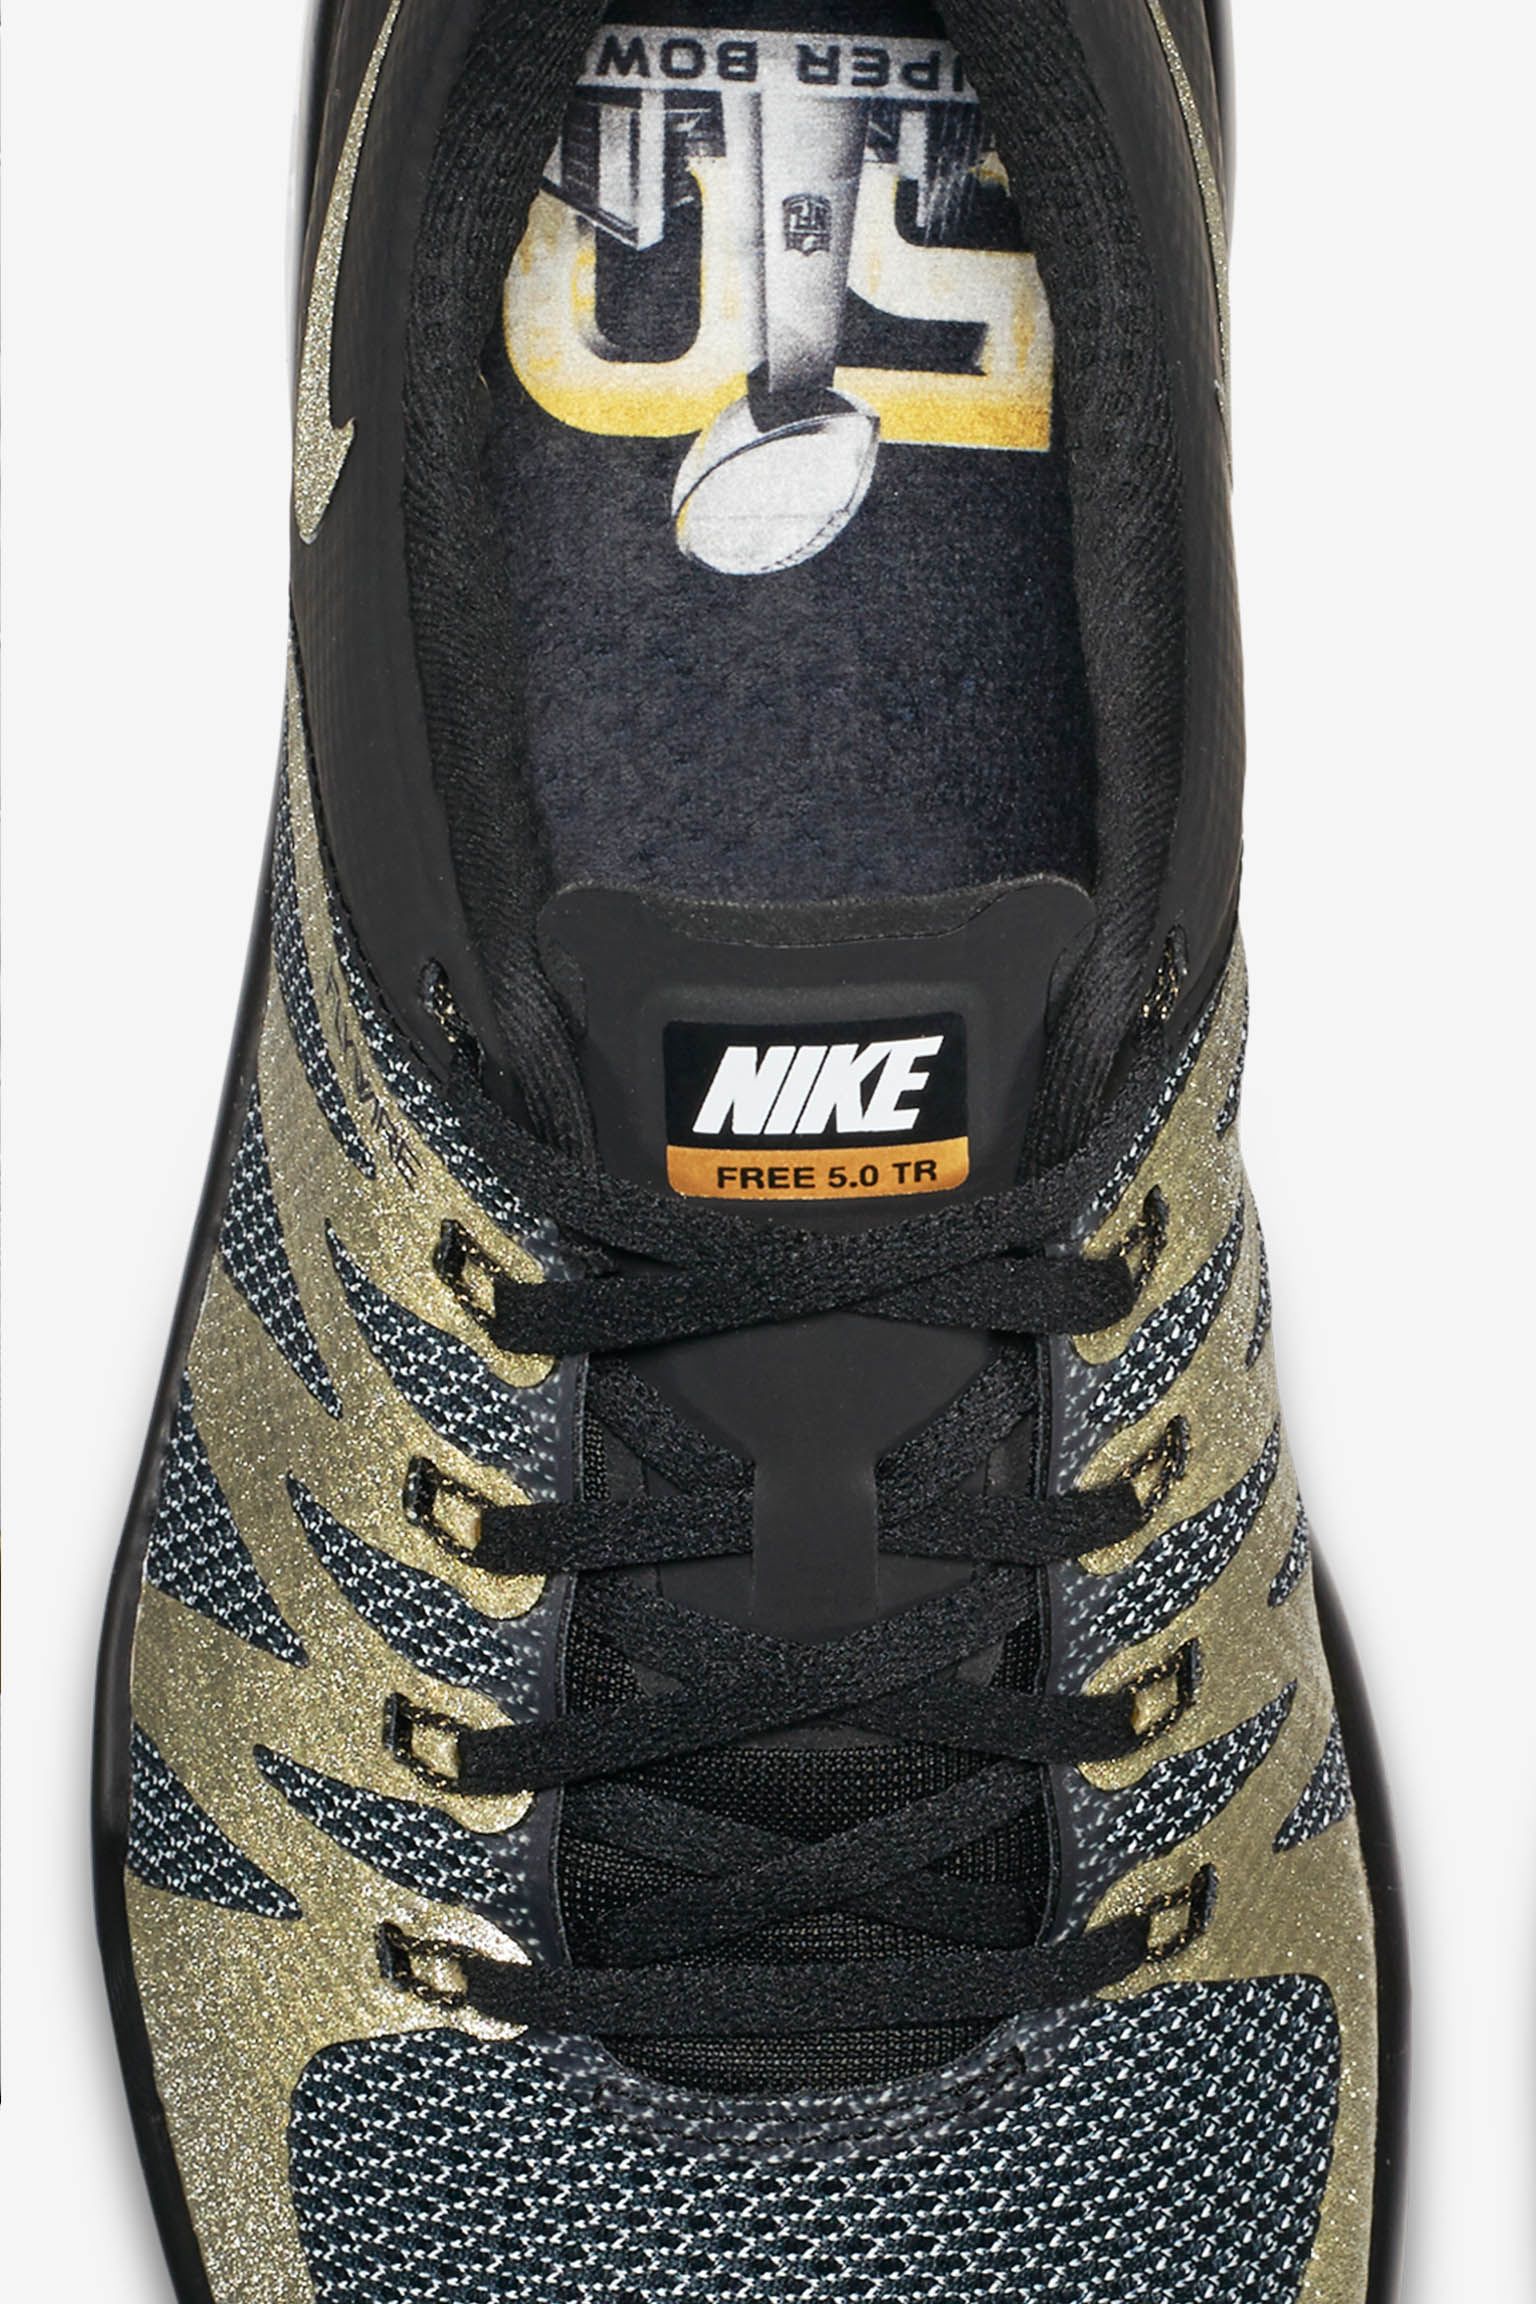 nike free trainer 5.0 weave gold